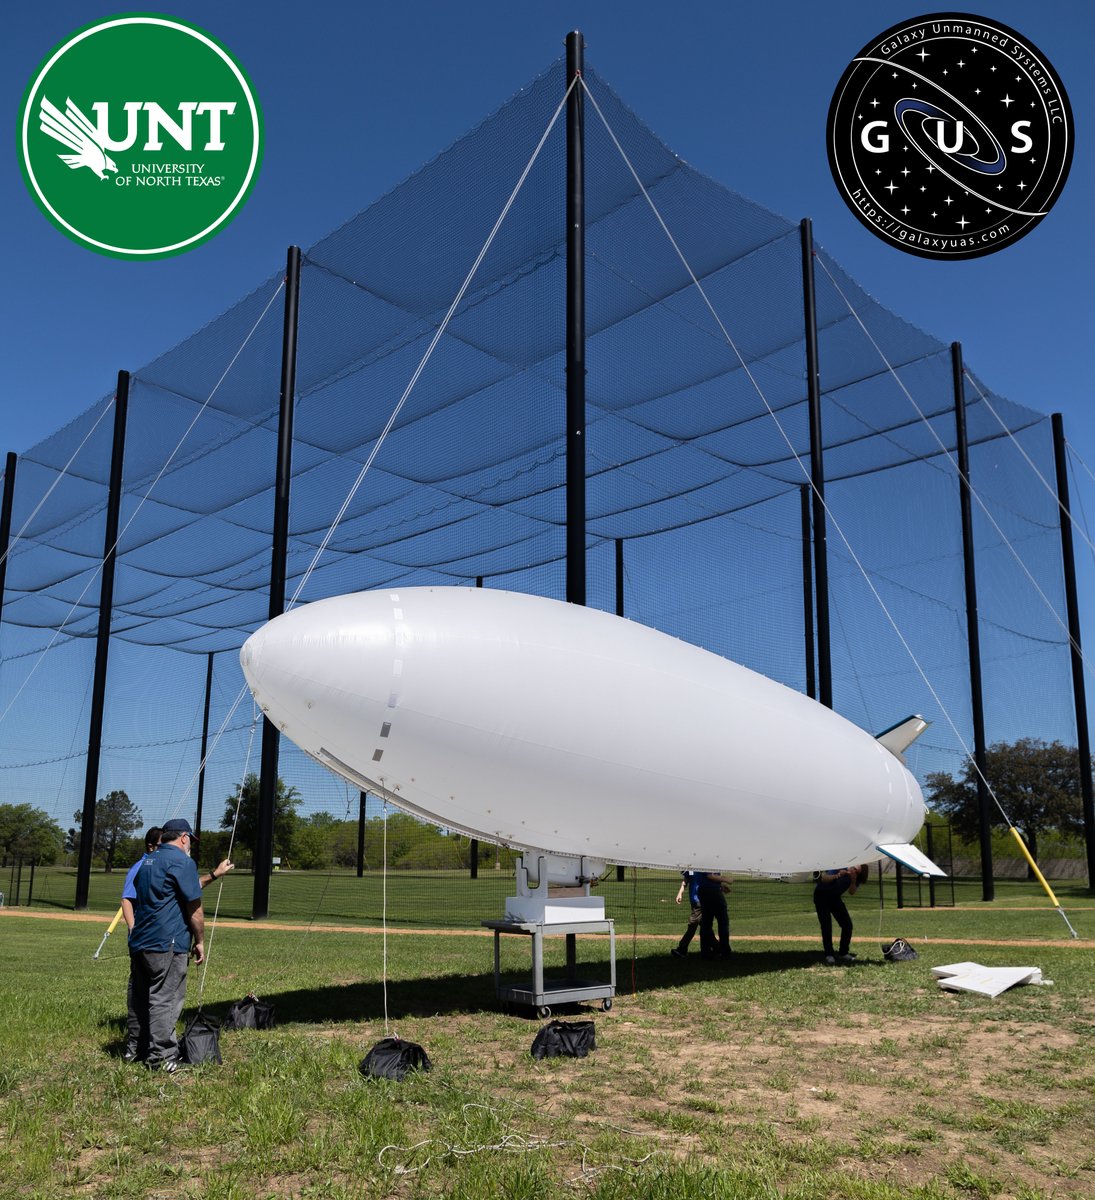 Congratulations to UNT on the UAAM facility launch! Galaxy enjoyed celebrating with you and sharing our contributions to the field! #AdvancedAirMobility